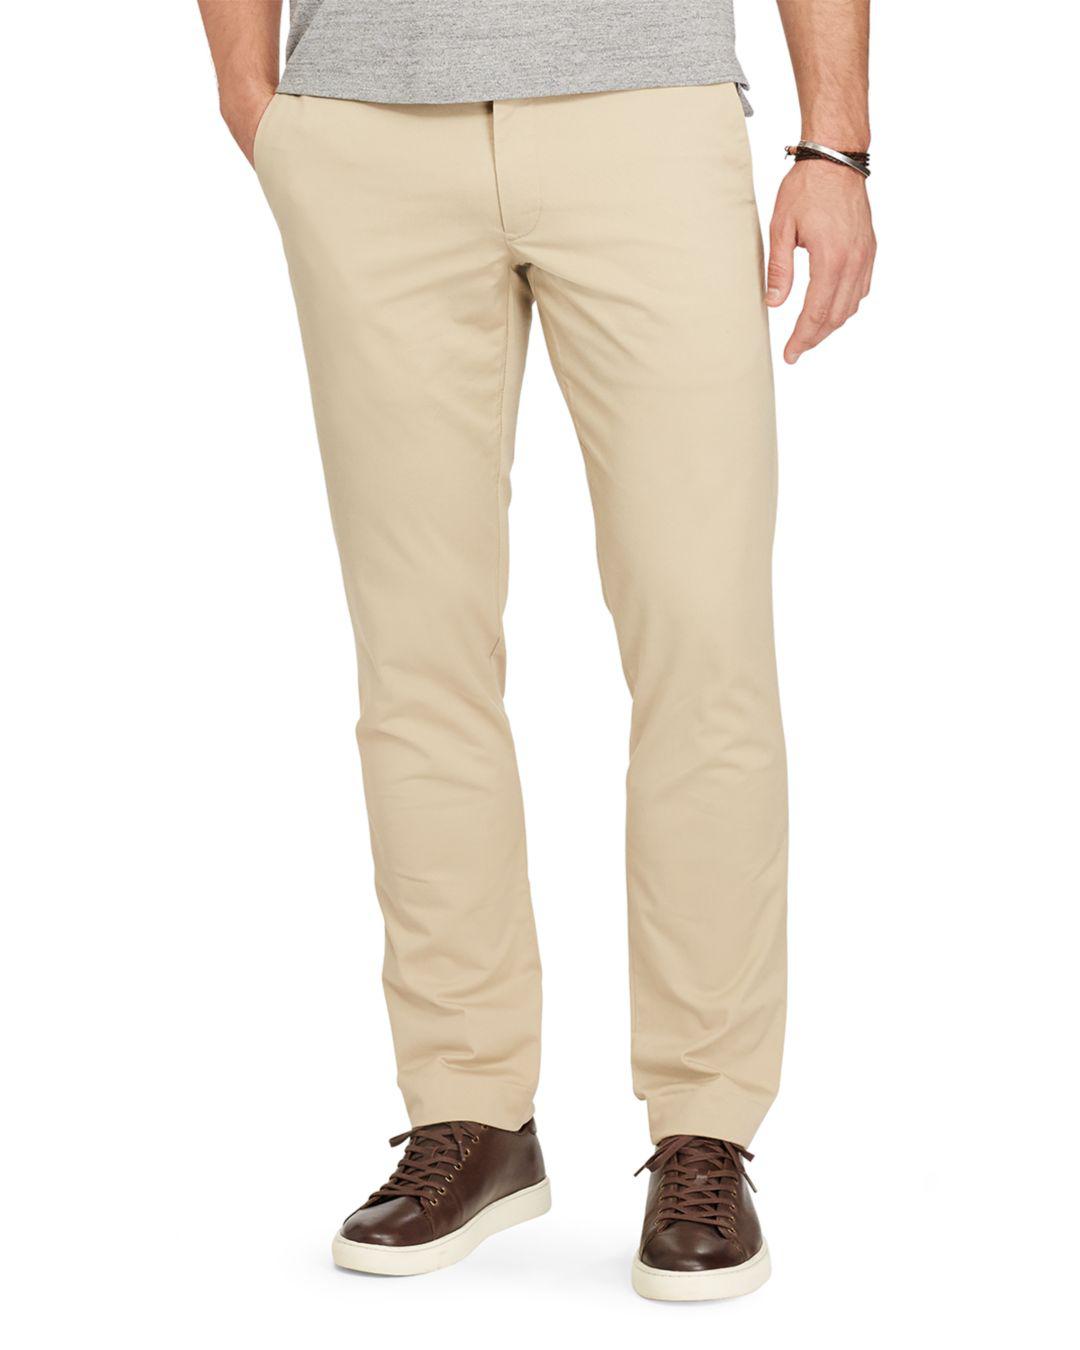 Polo Ralph Lauren Stretch Twill Slim Fit Pants in Natural for Men - Lyst